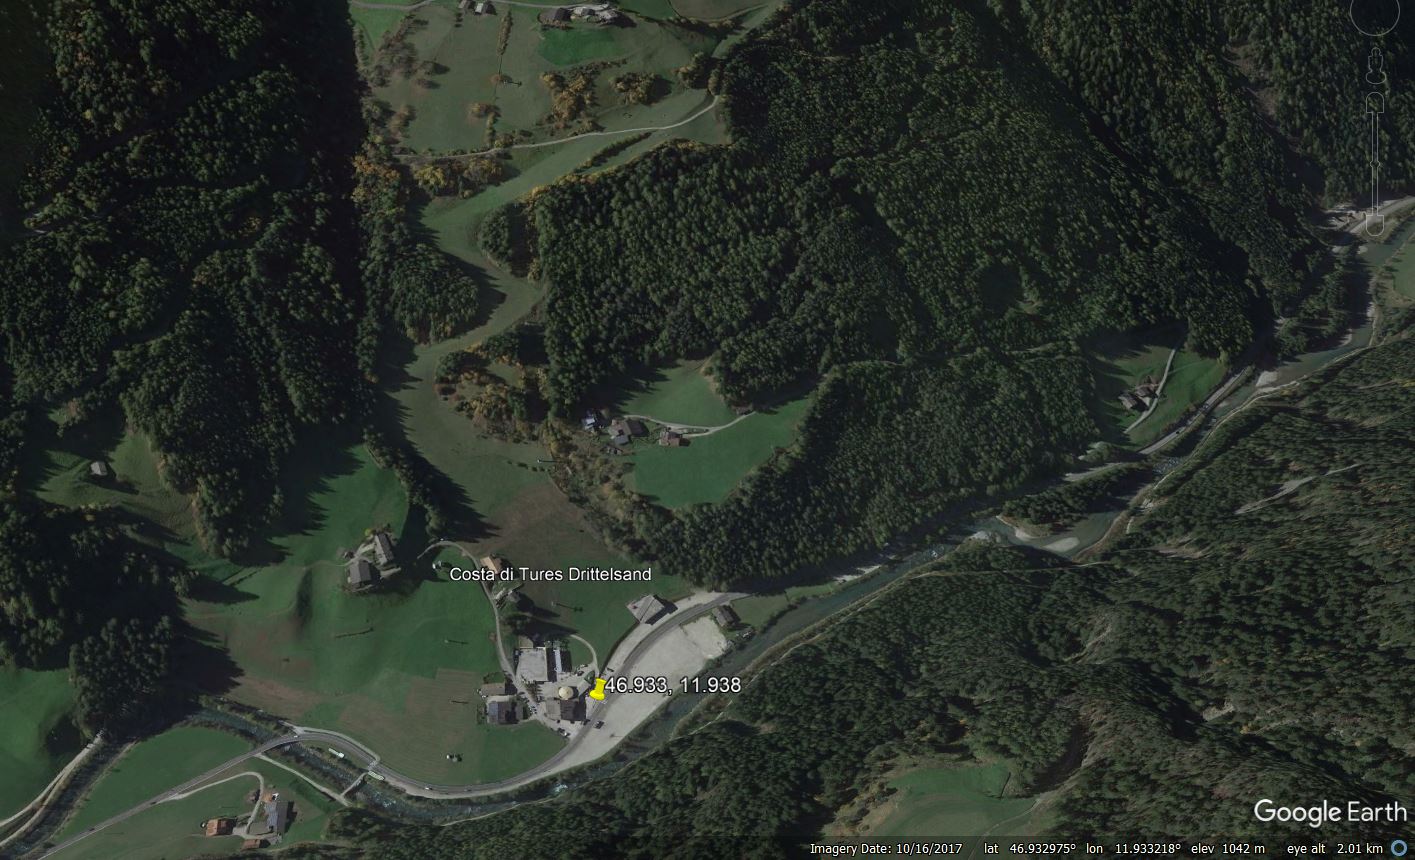 Google Earth view of the site of the 24 April 2023 rockslide at Sand in Taufers, Italy